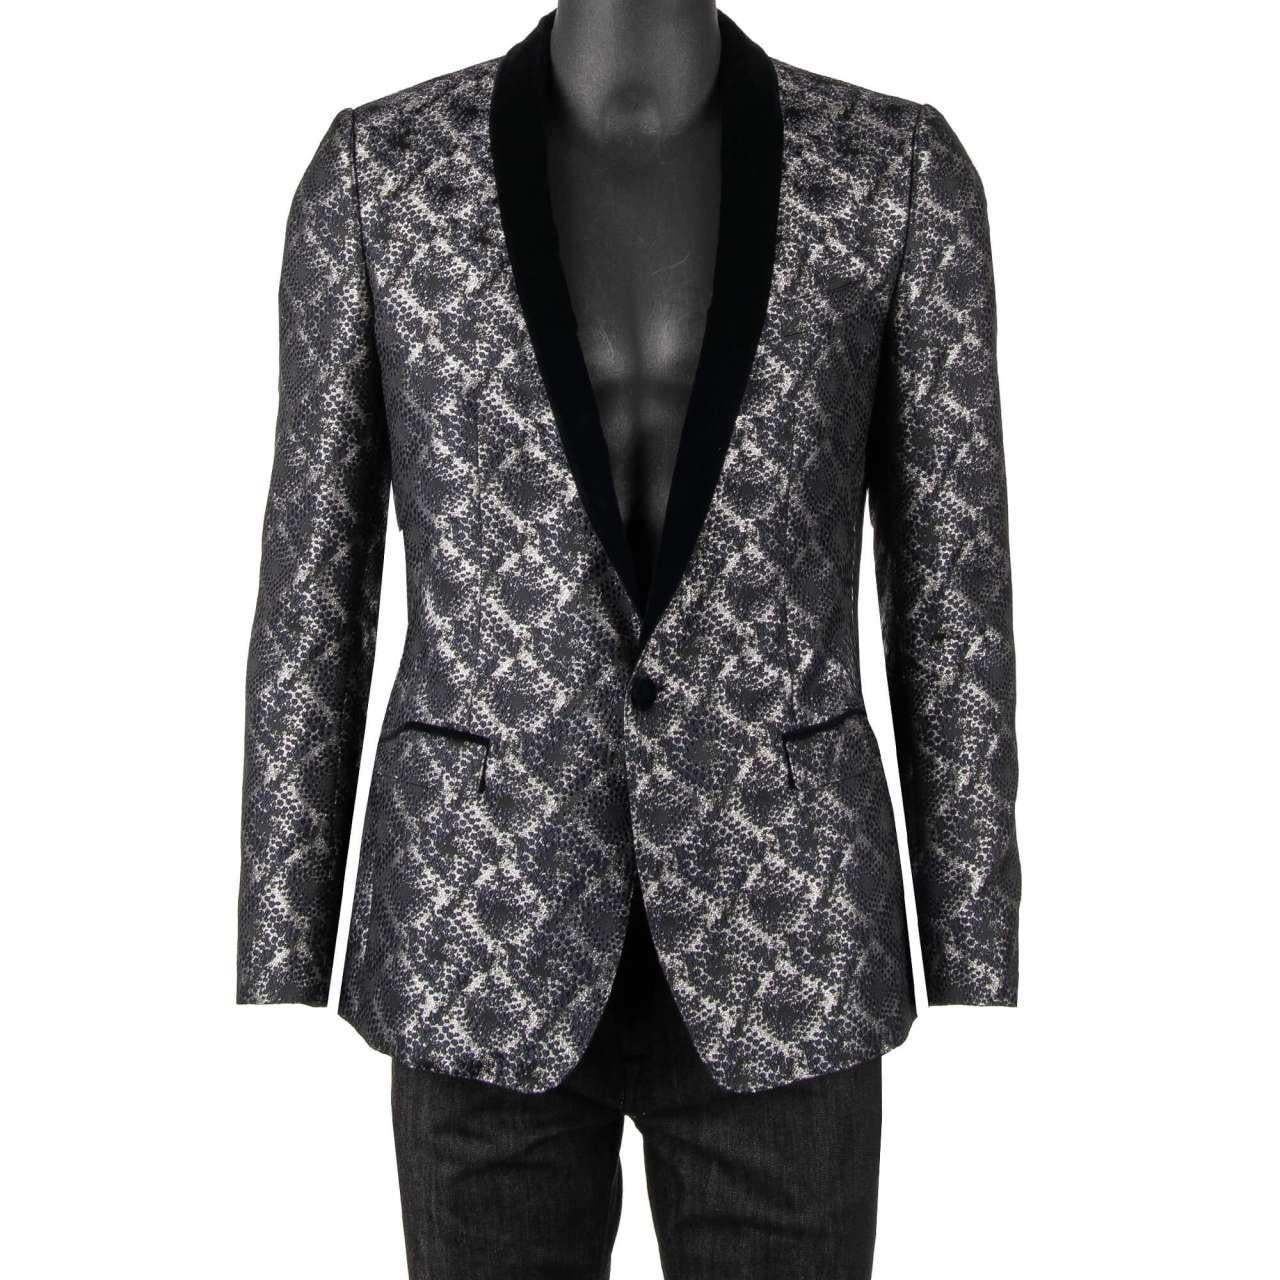 - Shiny lurex tuxedo / blazer GOLD in dark blue and silver with a contrast velvet shawl lapel by DOLCE & GABBANA - Former RRP: EUR 1.950 - Made In Italy - New with Tag - Slim Fit - Model: G2KR4T-FJM09-S8350 - Material: 83% Polyester, 14% Cotton, 3%